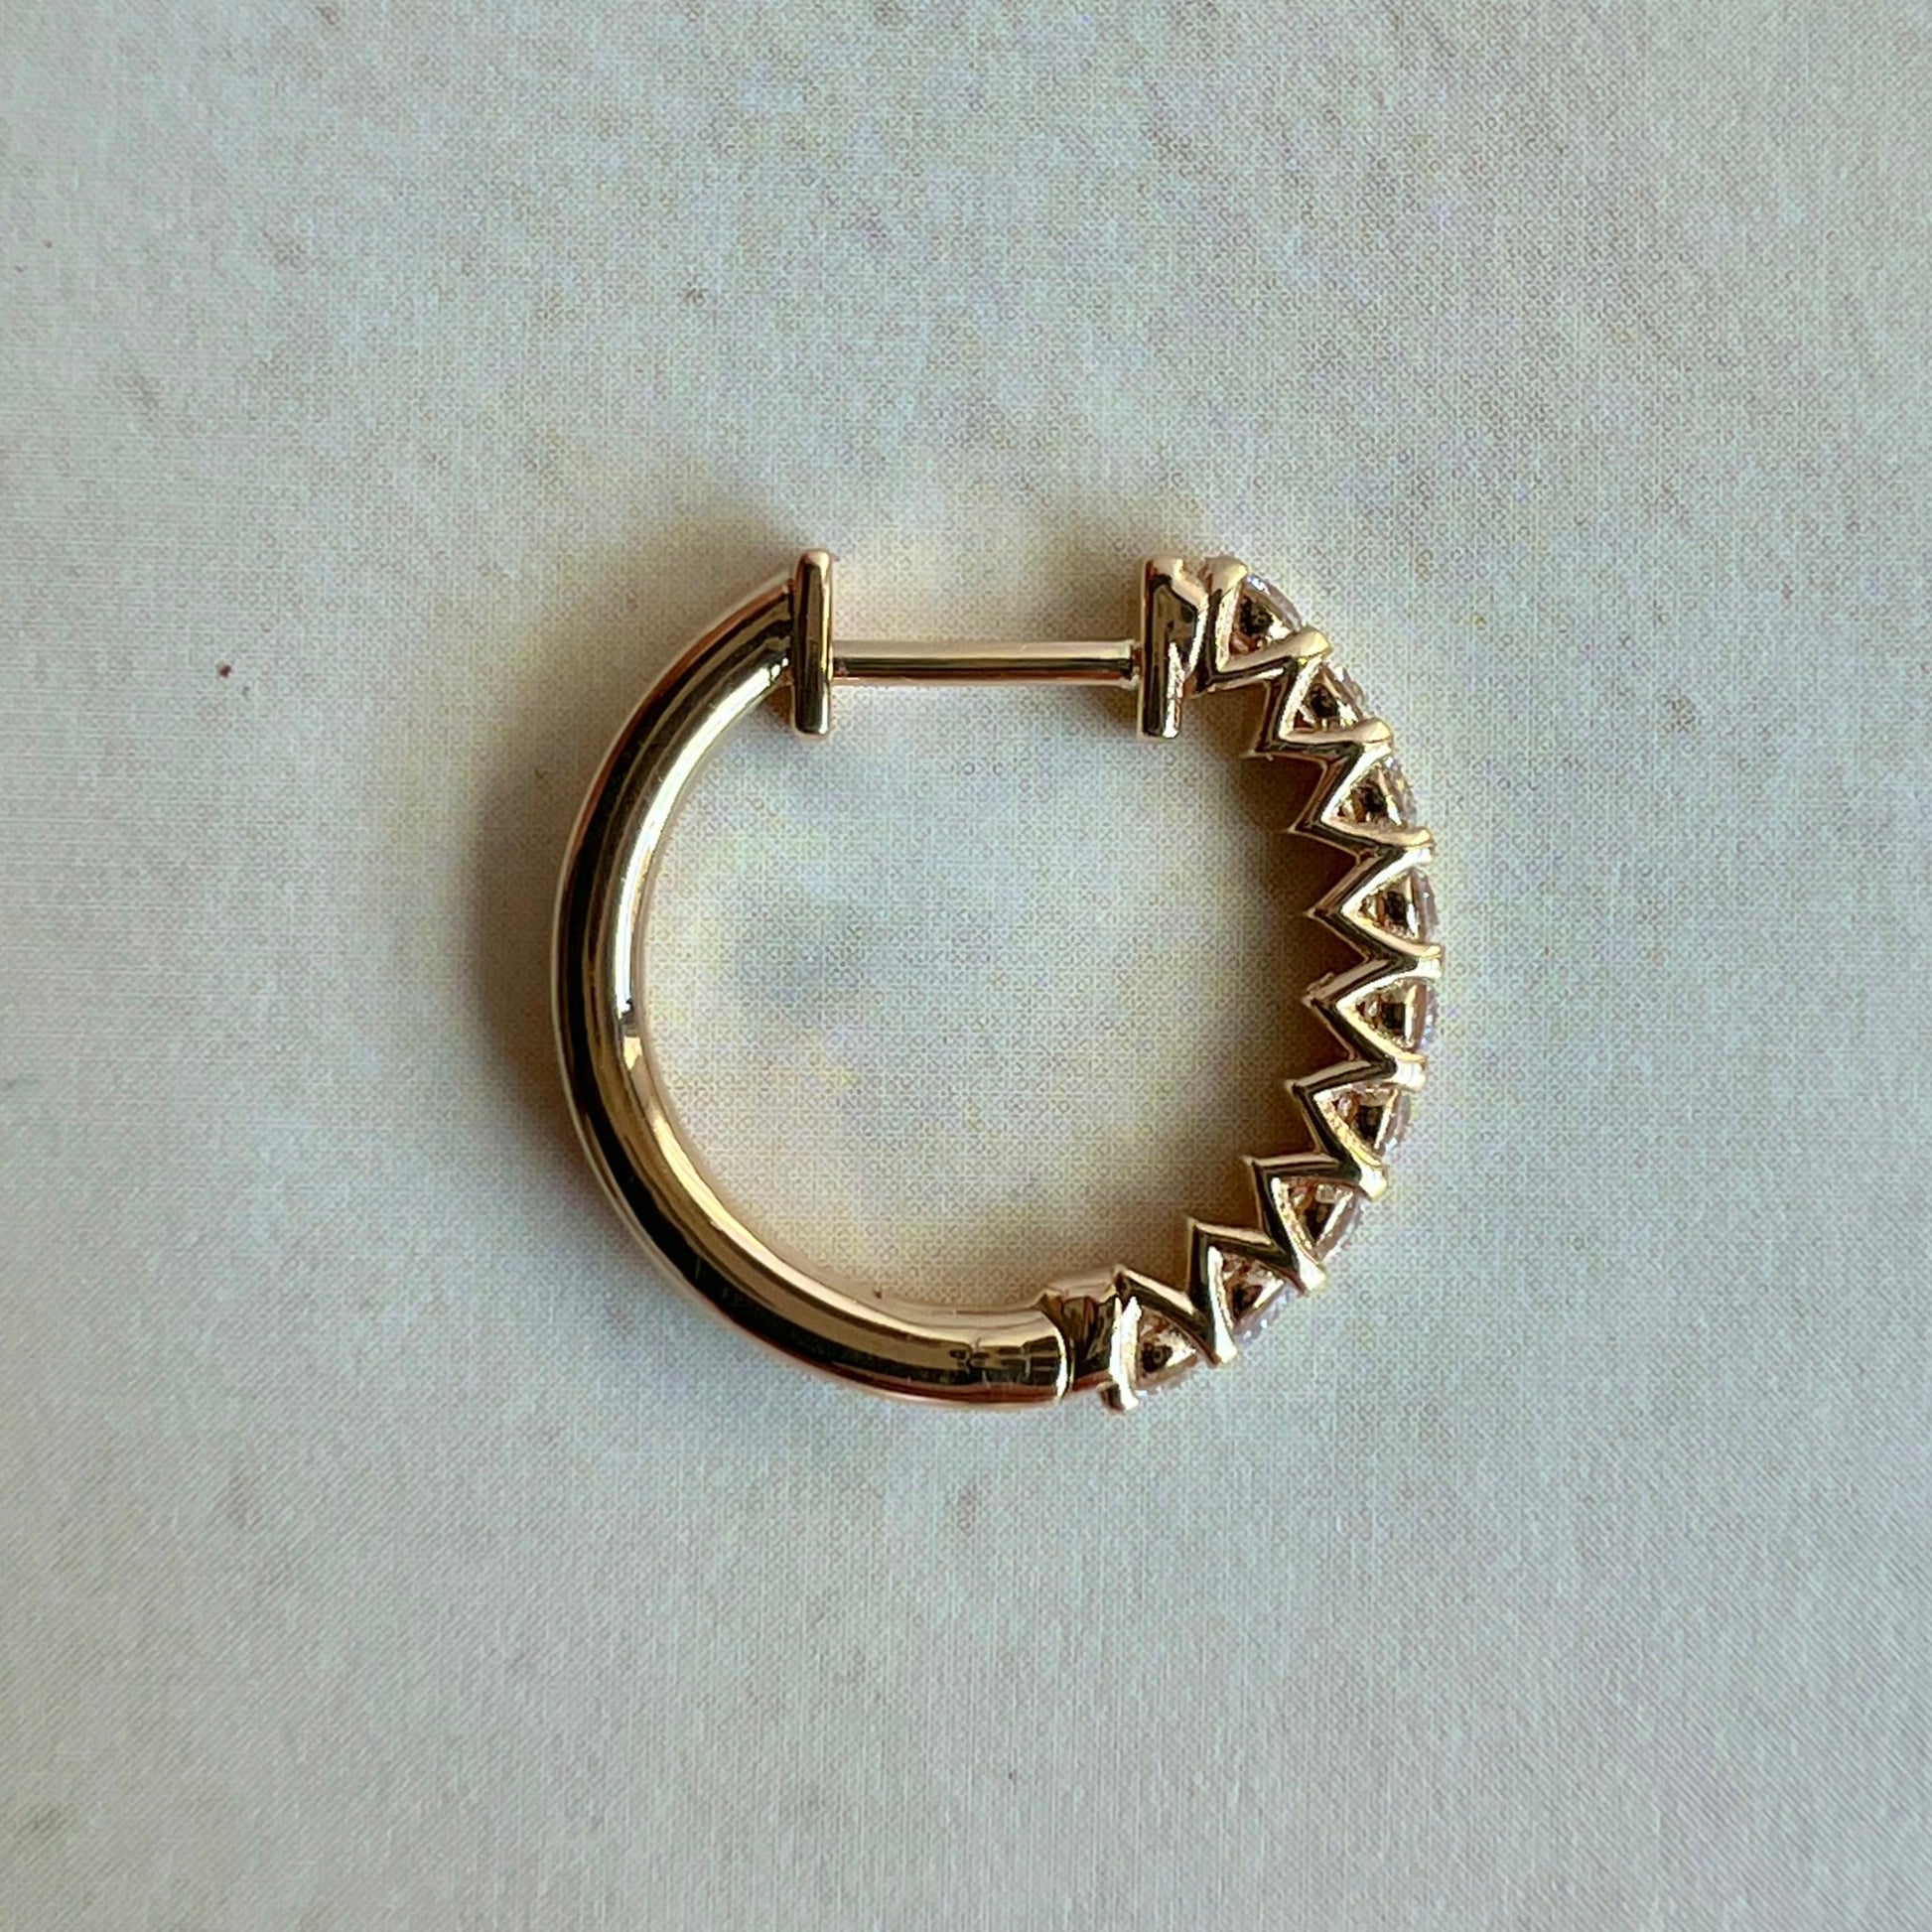 HOOP EARRING "ARCHES" WITH WHITE DIAMONDS / SOLID GOLD